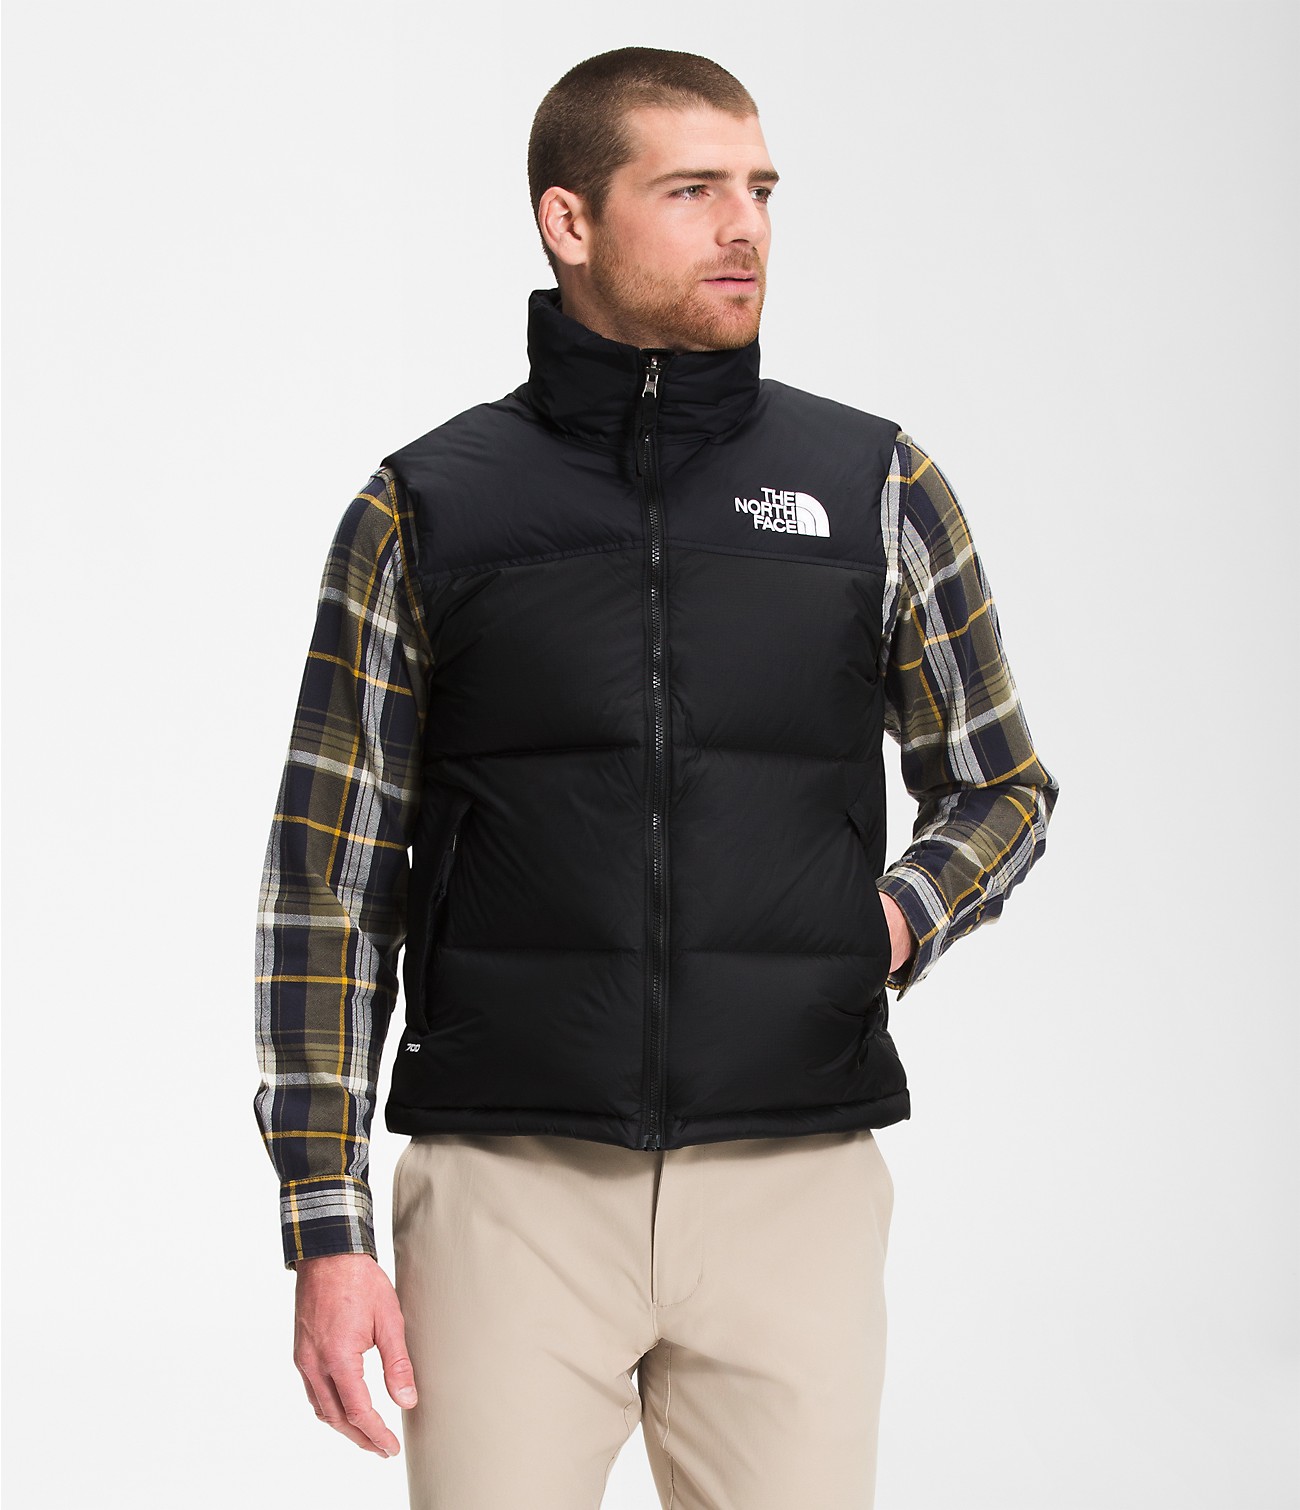 Unlock Wilderness' choice in the Moncler Vs North Face comparison, the 1996 Retro Nuptse Vest by The North Face